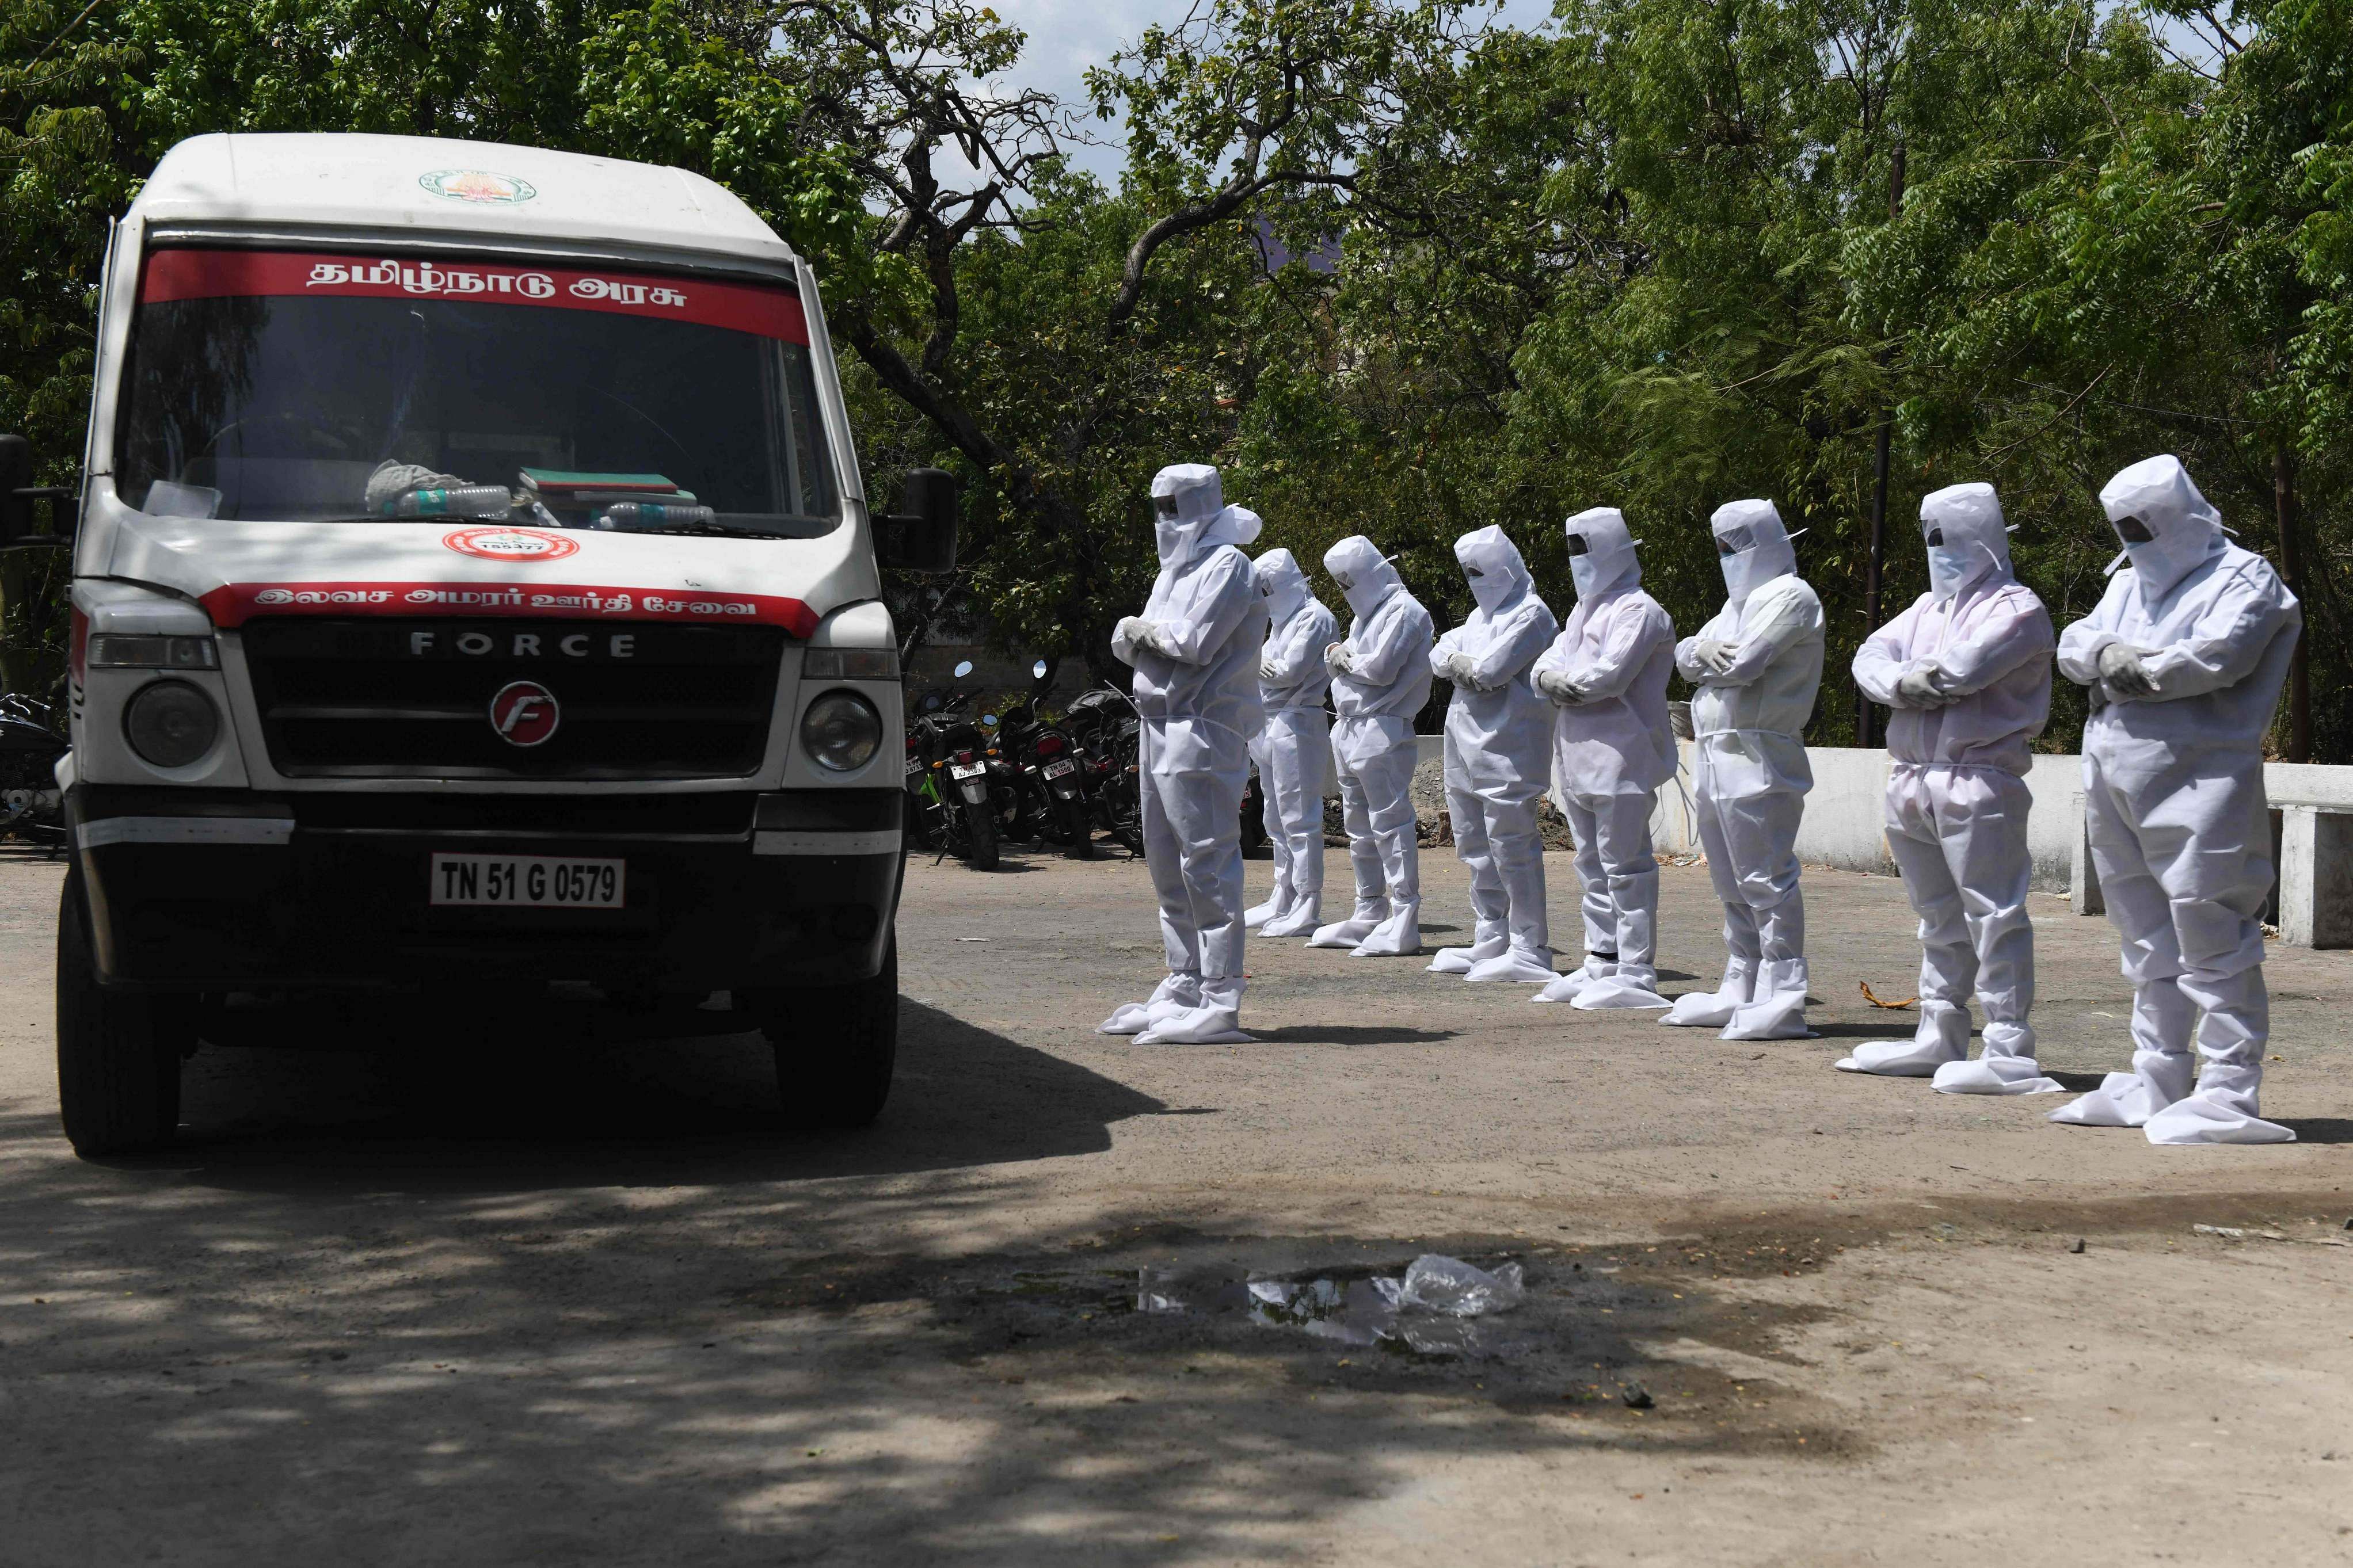 Volunteers of the Social Democratic Party of India wearing a protective gear offer funeral prayers in front of an ambulance carrying abandoned bodies of victims who died from the COVID-19 coronavirus, at a graveyard in Chennai. Credit: AFP Photo